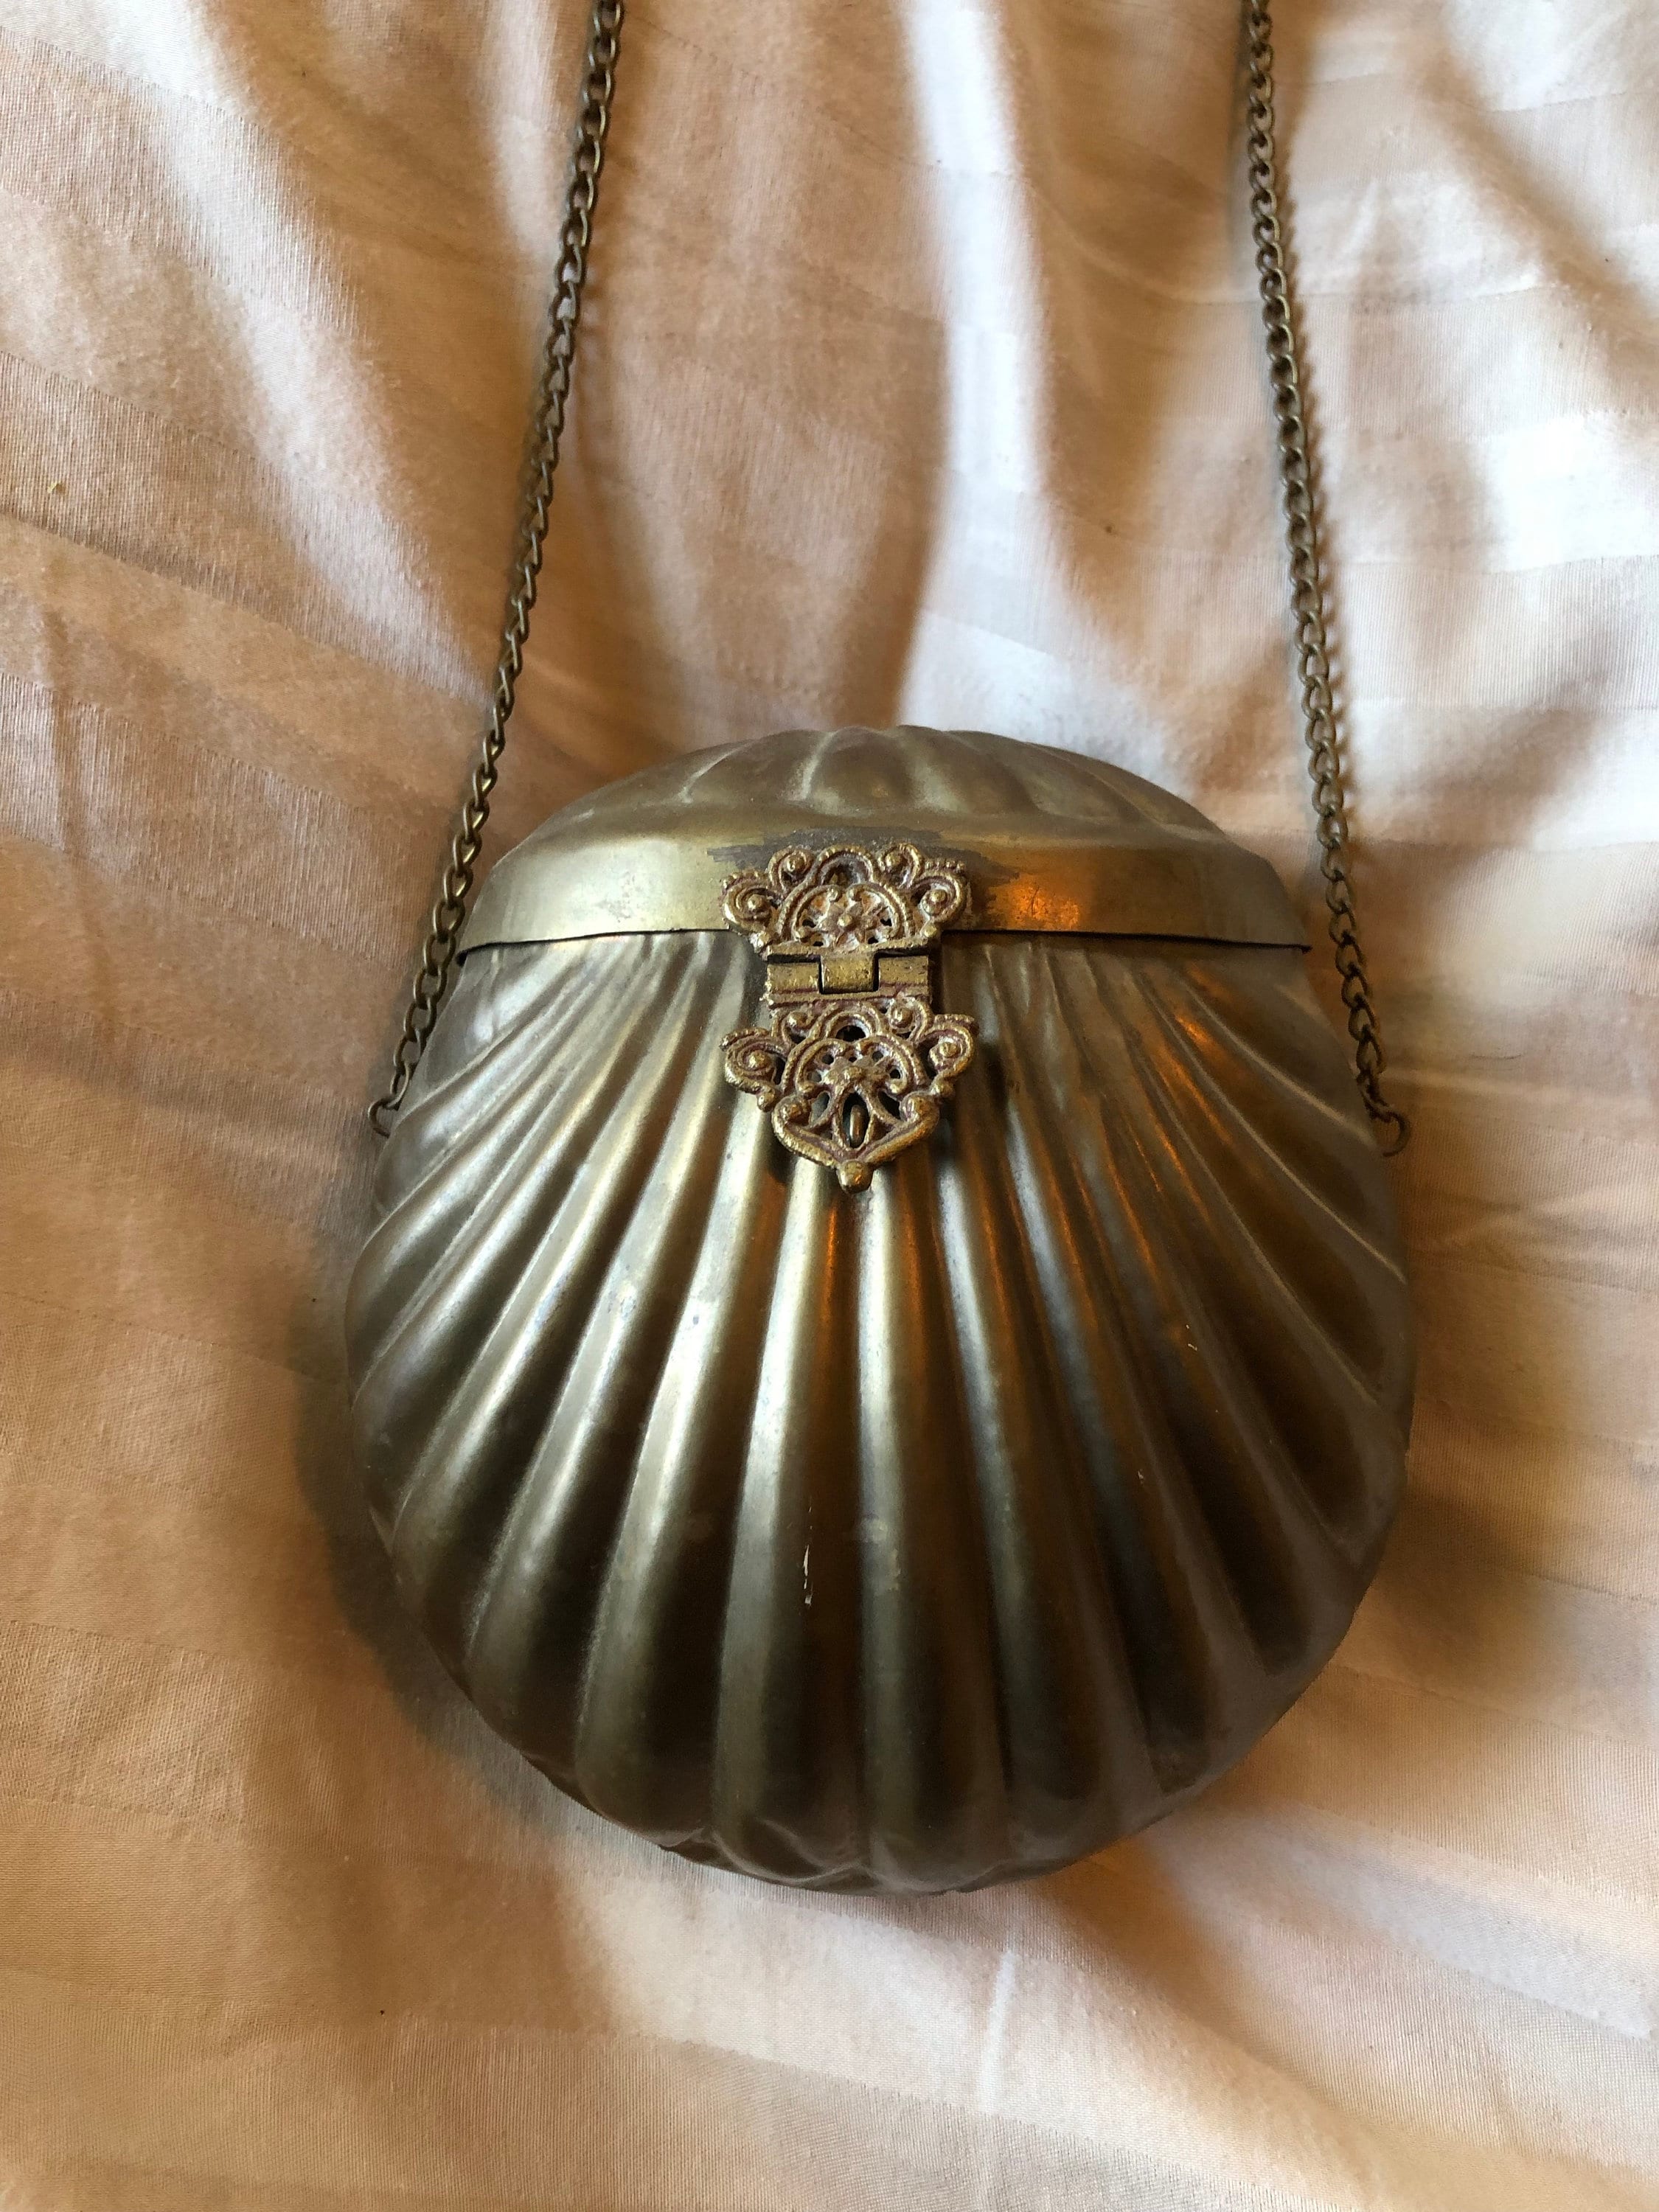 Antique Brass Clamshell Purse Lined With Royal Purple Velvet. 